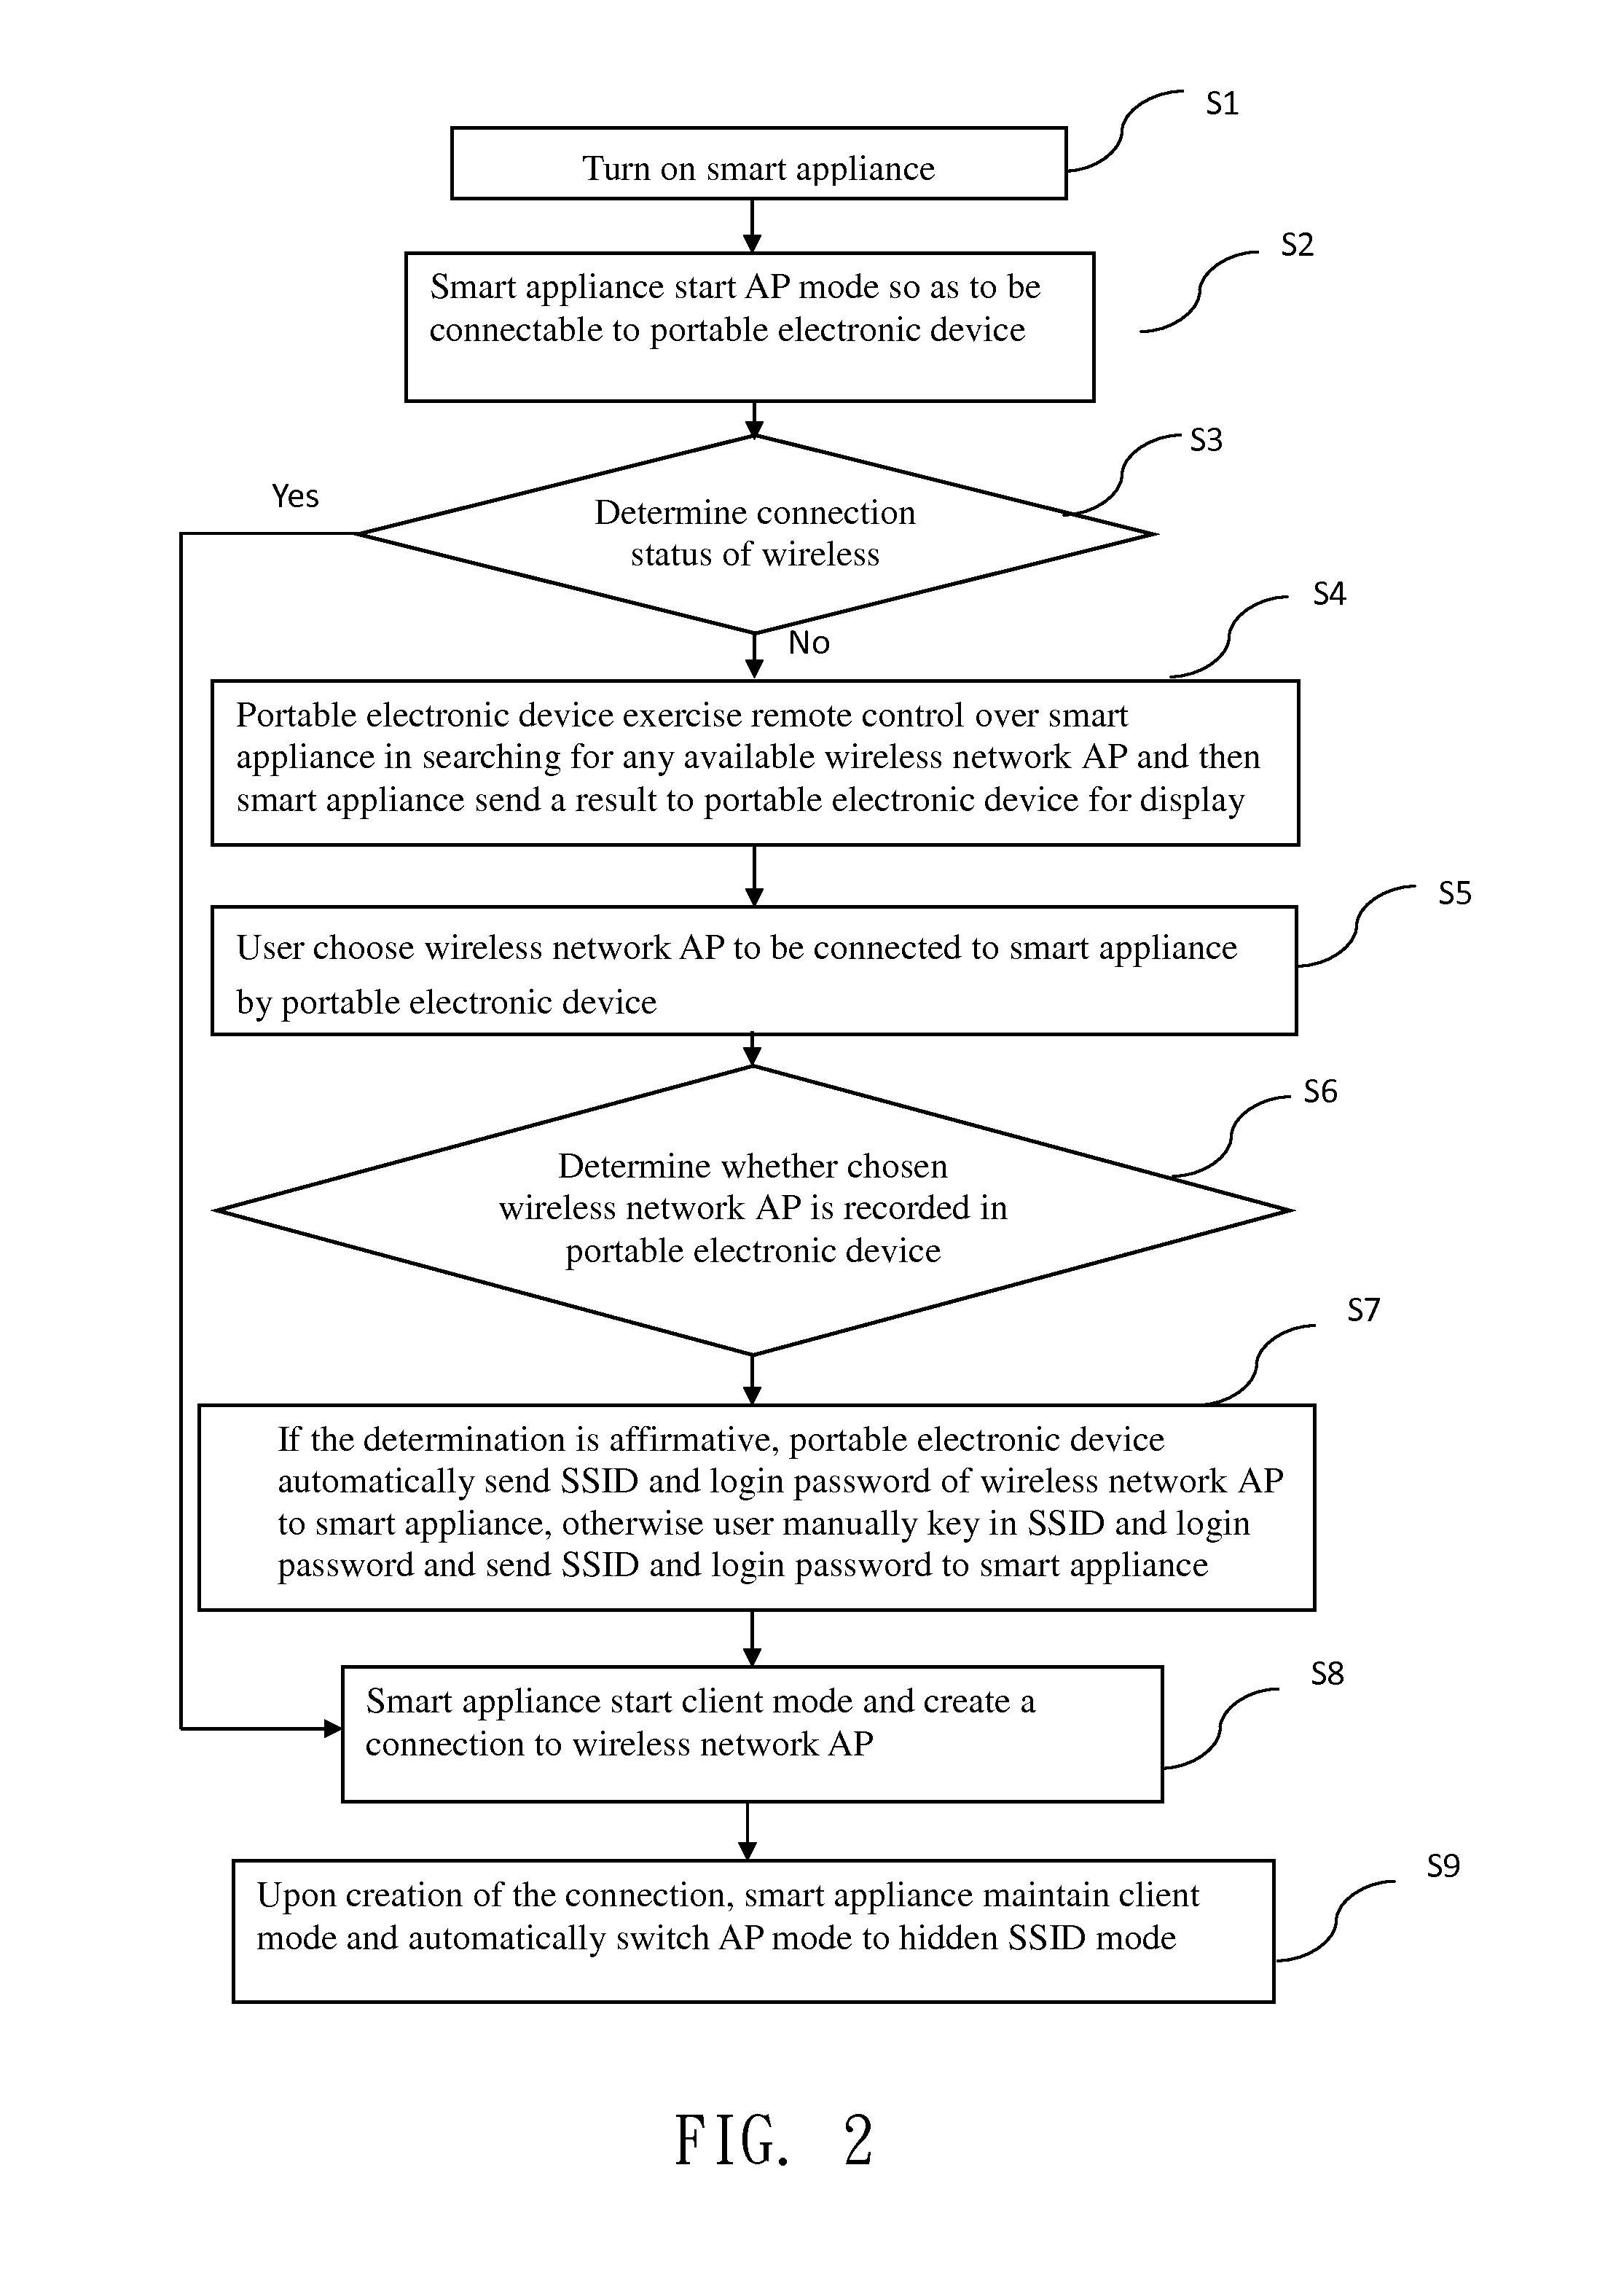 Wireless Network Configuration Method and System for Smart Appliance